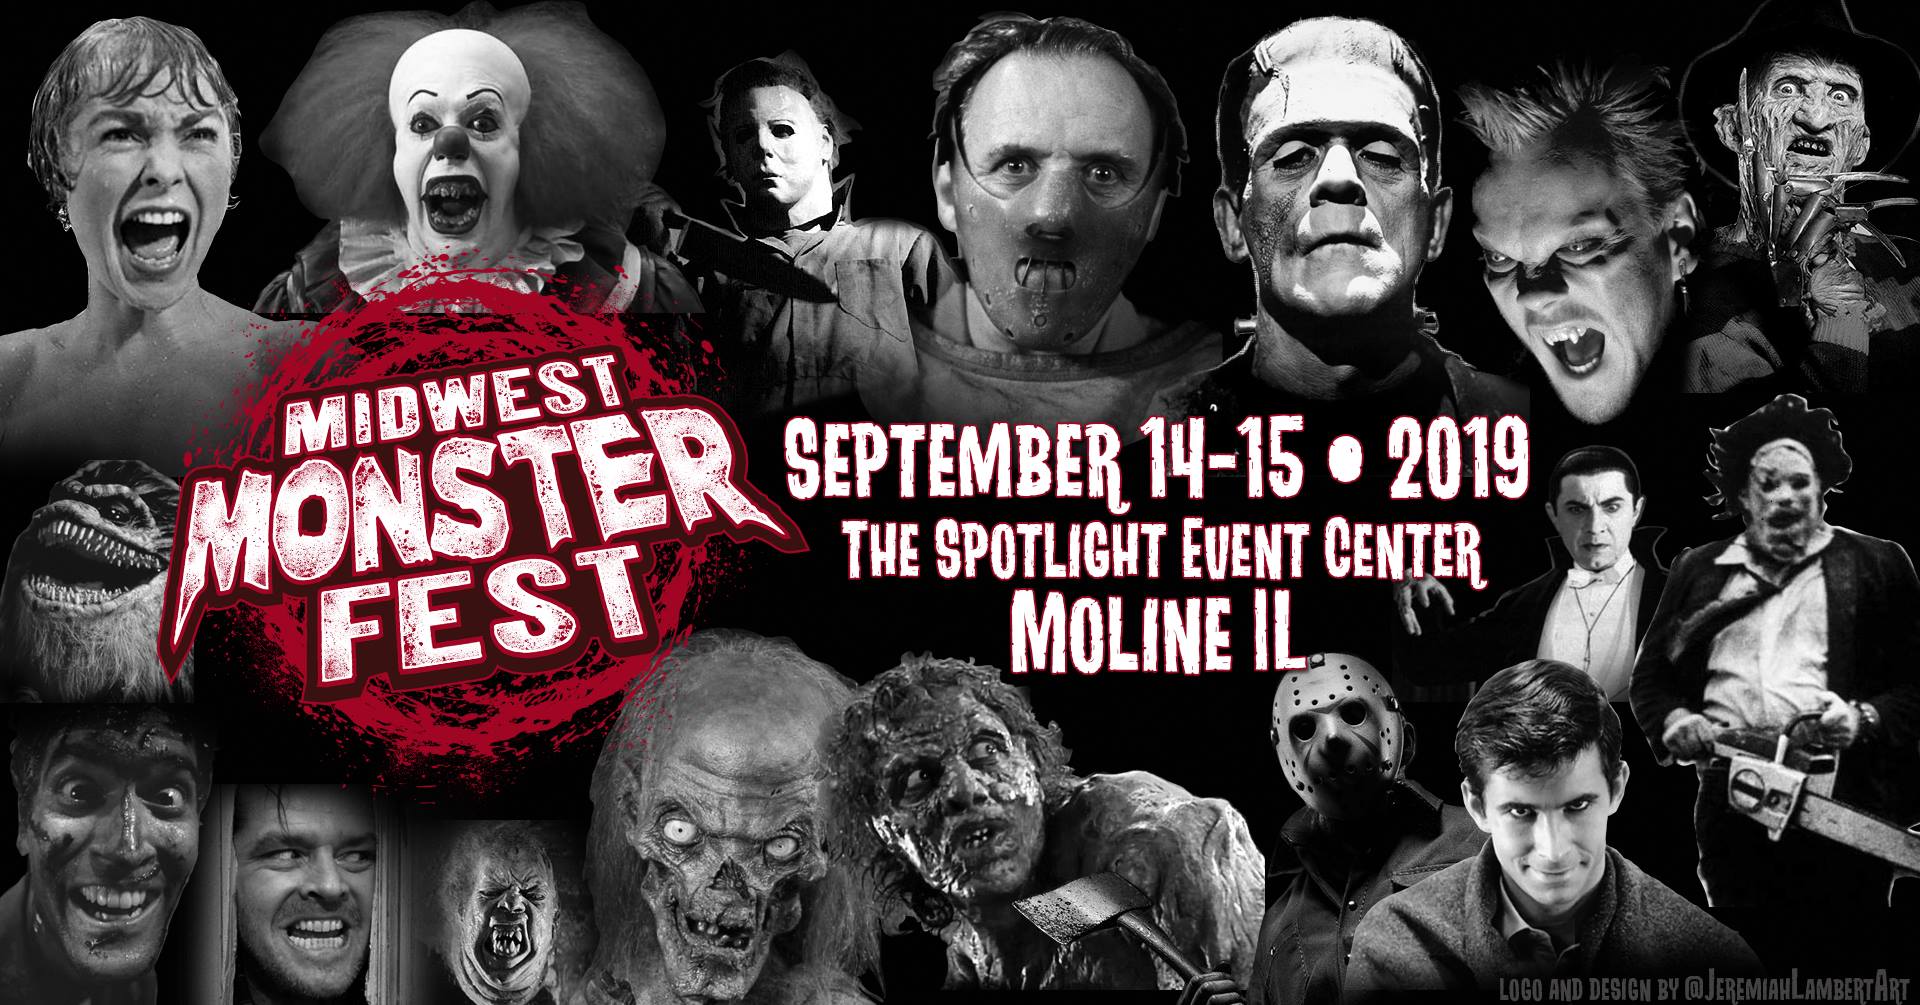 Midwest Monster Fest Stalks Into the Quad-Cities